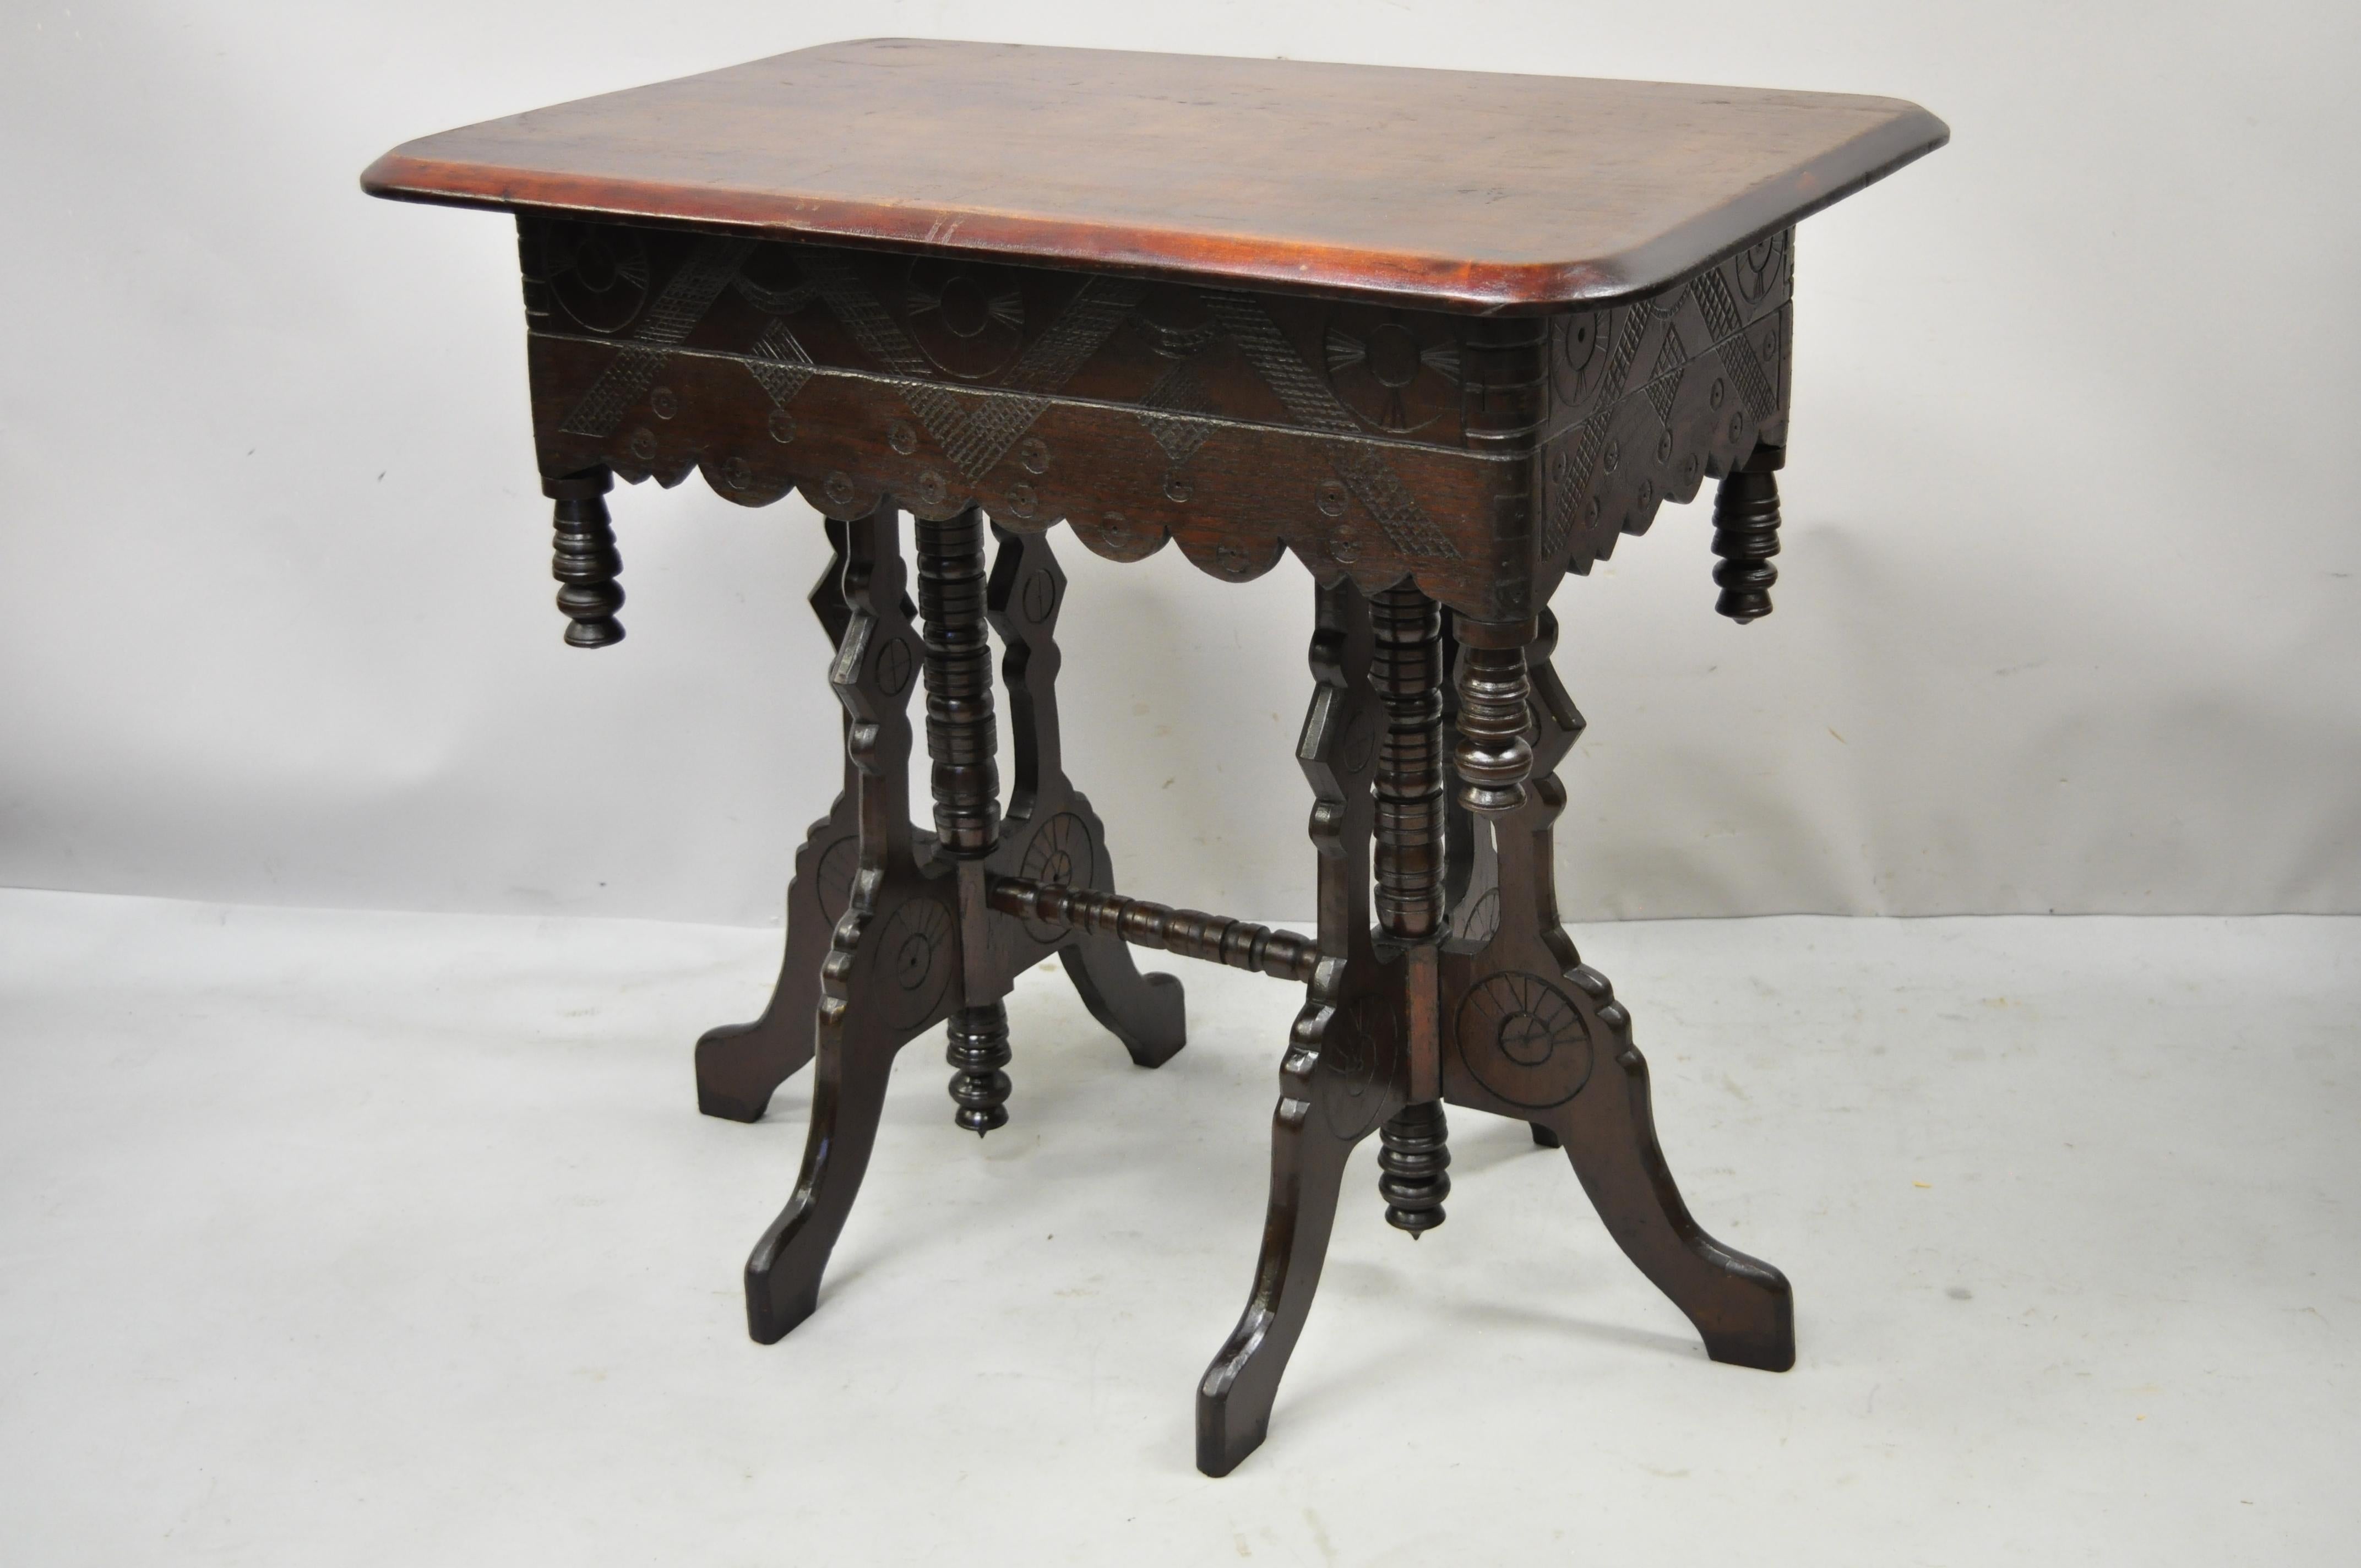 Antique Eastlake Victorian Aesthetic Movement carved walnut 6 leg parlor table. Item features 6 legs, turn carved finials, solid wood construction, beautiful wood grain, nicely carved details, very nice antique item, quality American craftsmanship,